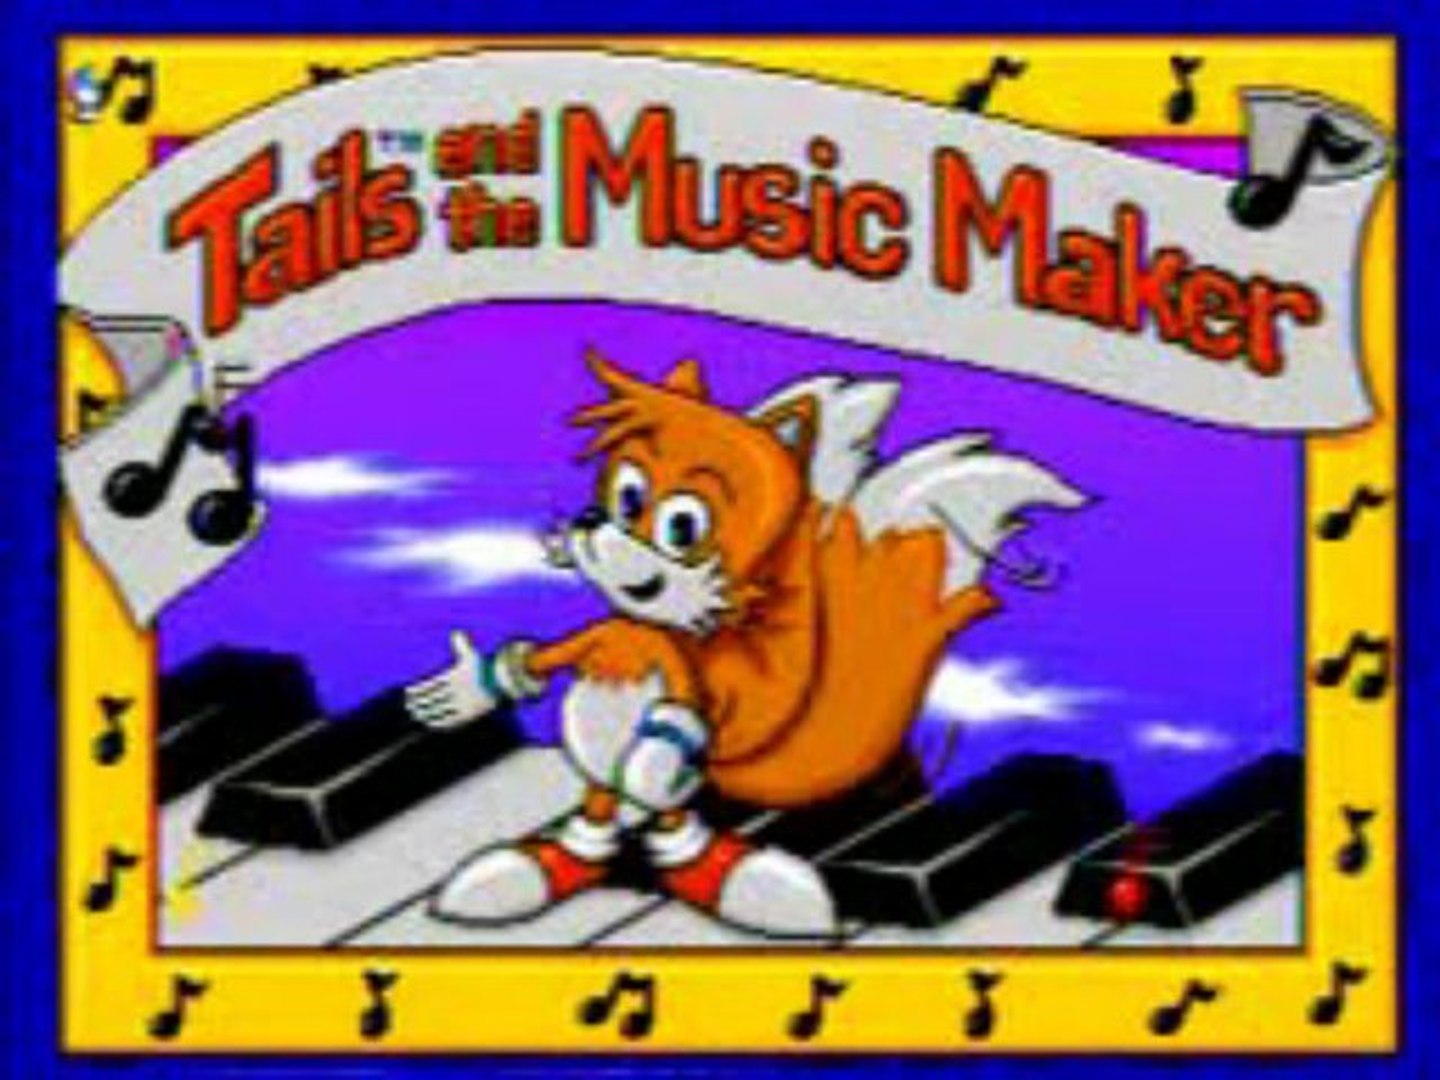 Tails and the music maker! - Imgflip